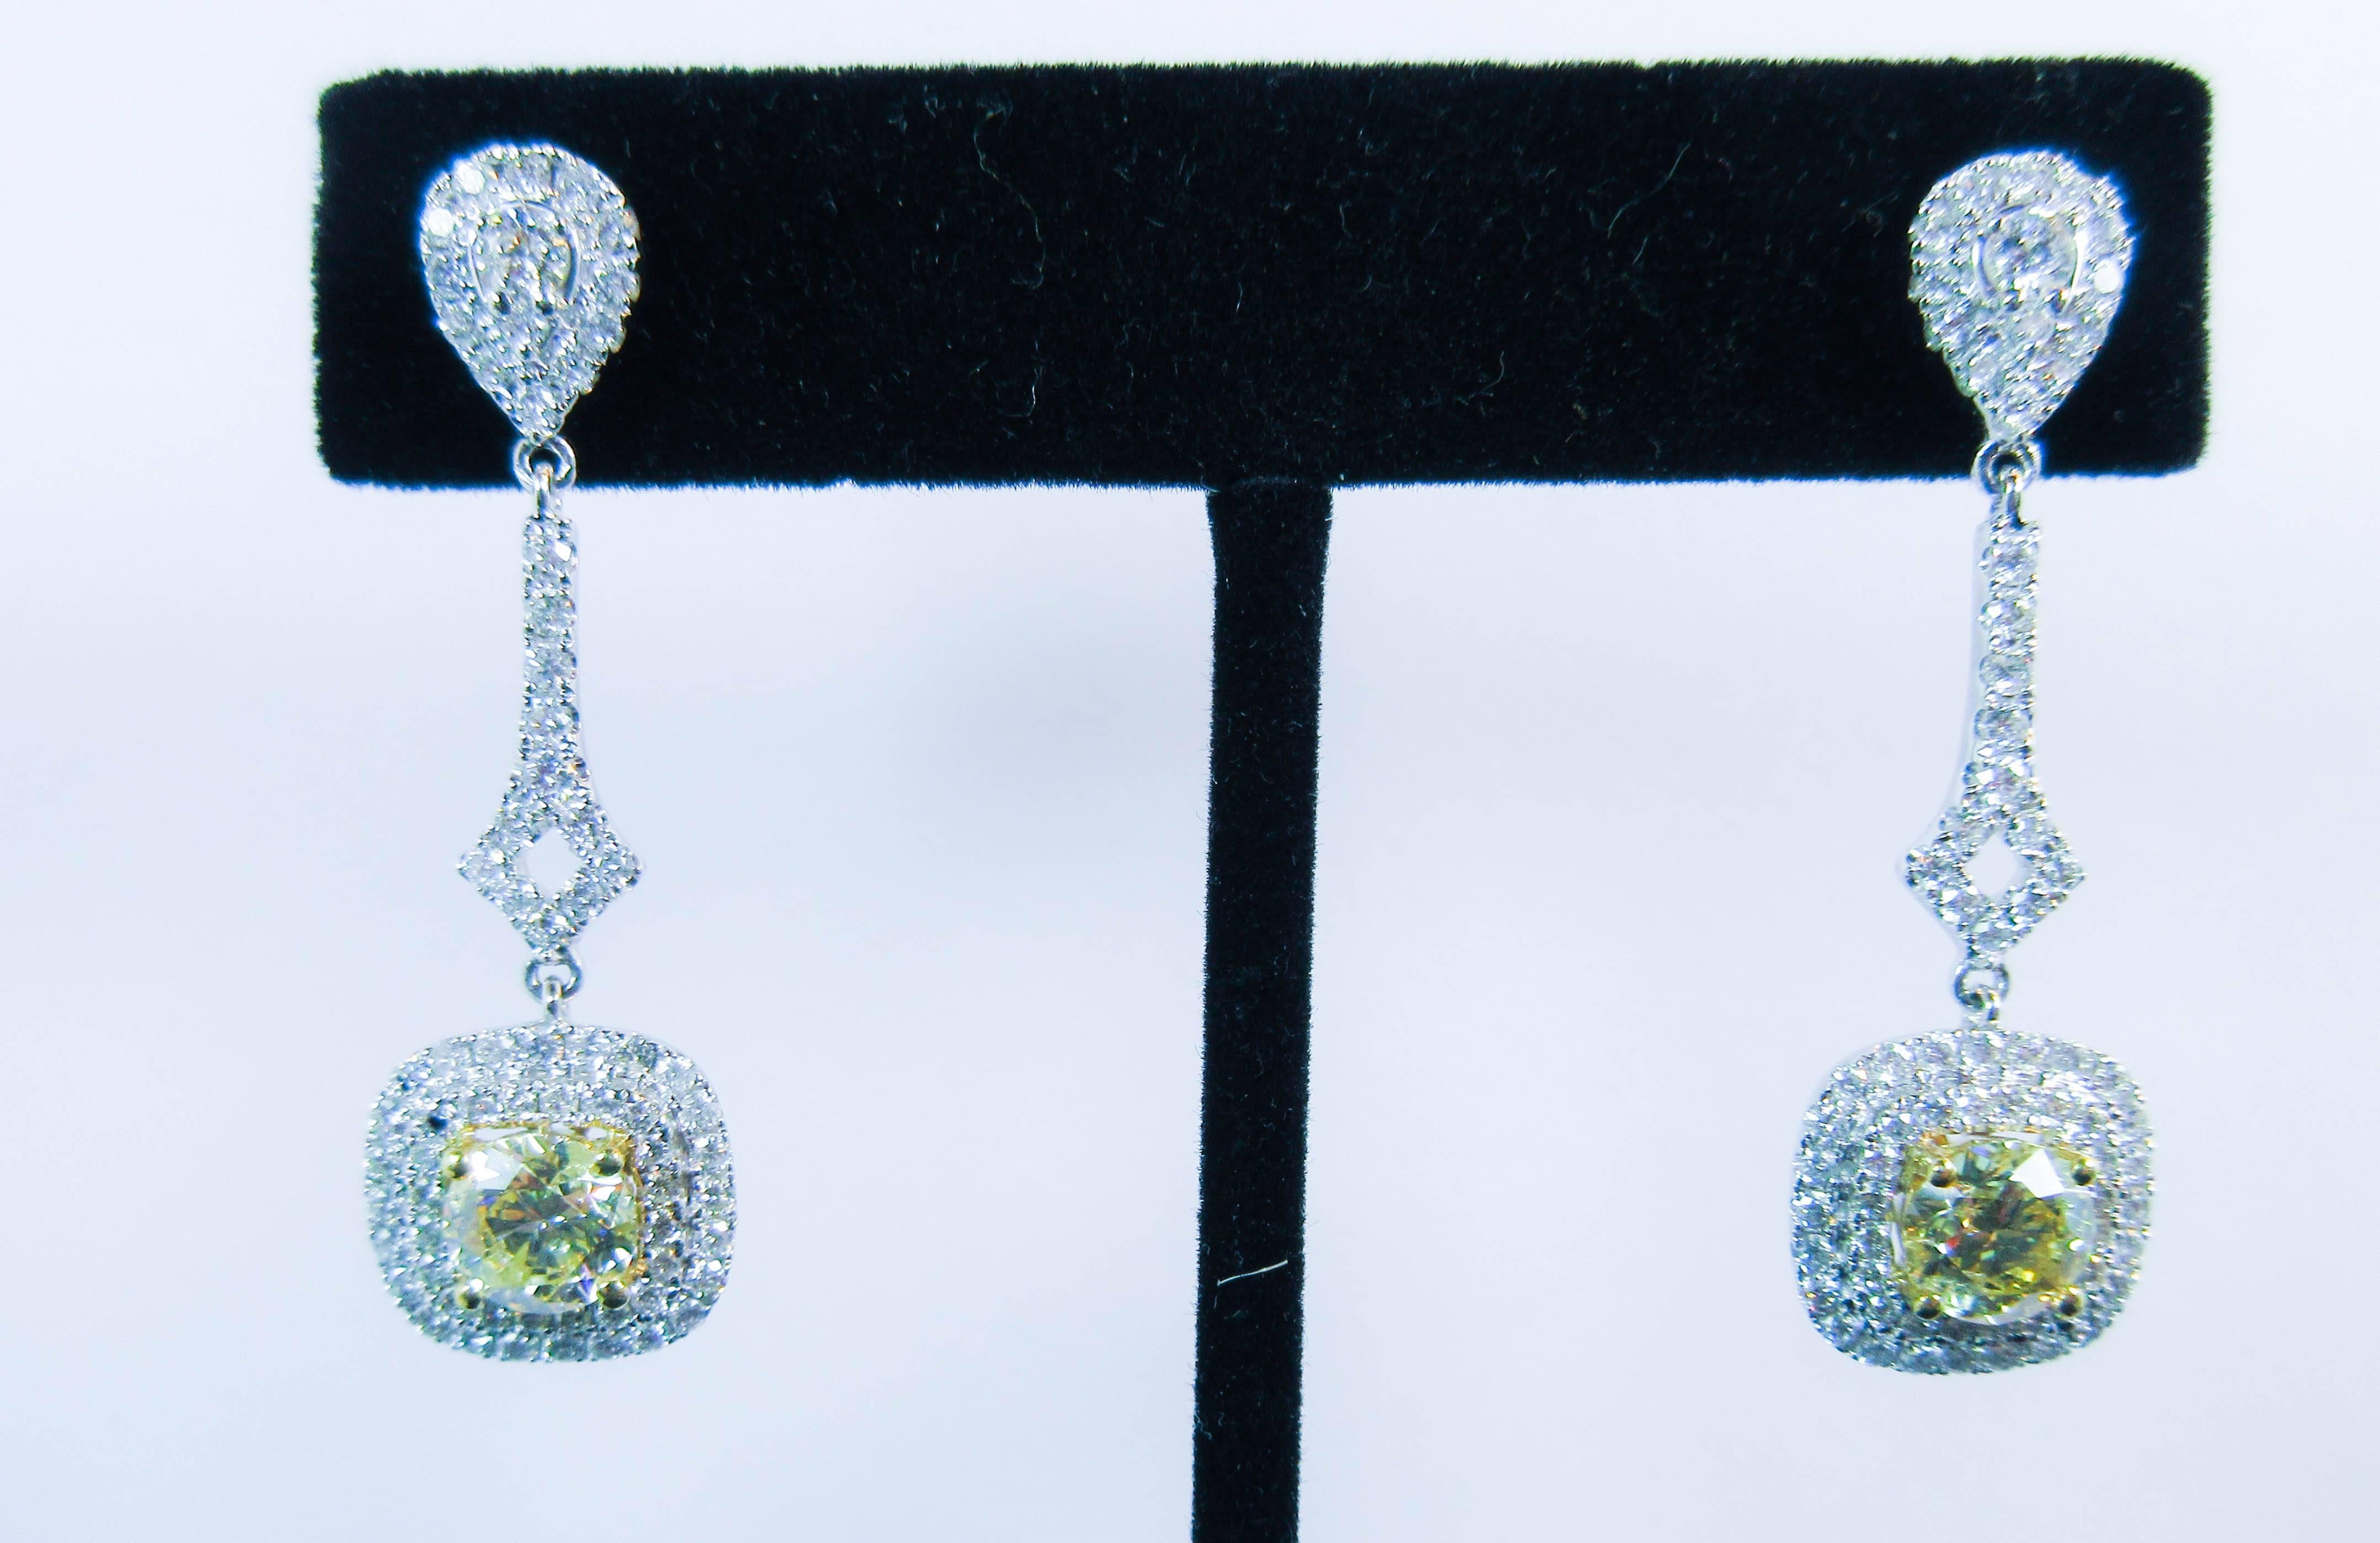 These earrings are composed of an 18KT white gold with stunning yellow round cut center diamonds, accented with pave white diamonds. Striking drop style. In excellent condition.

Please feel free to ask any questions you may have, we are happy to